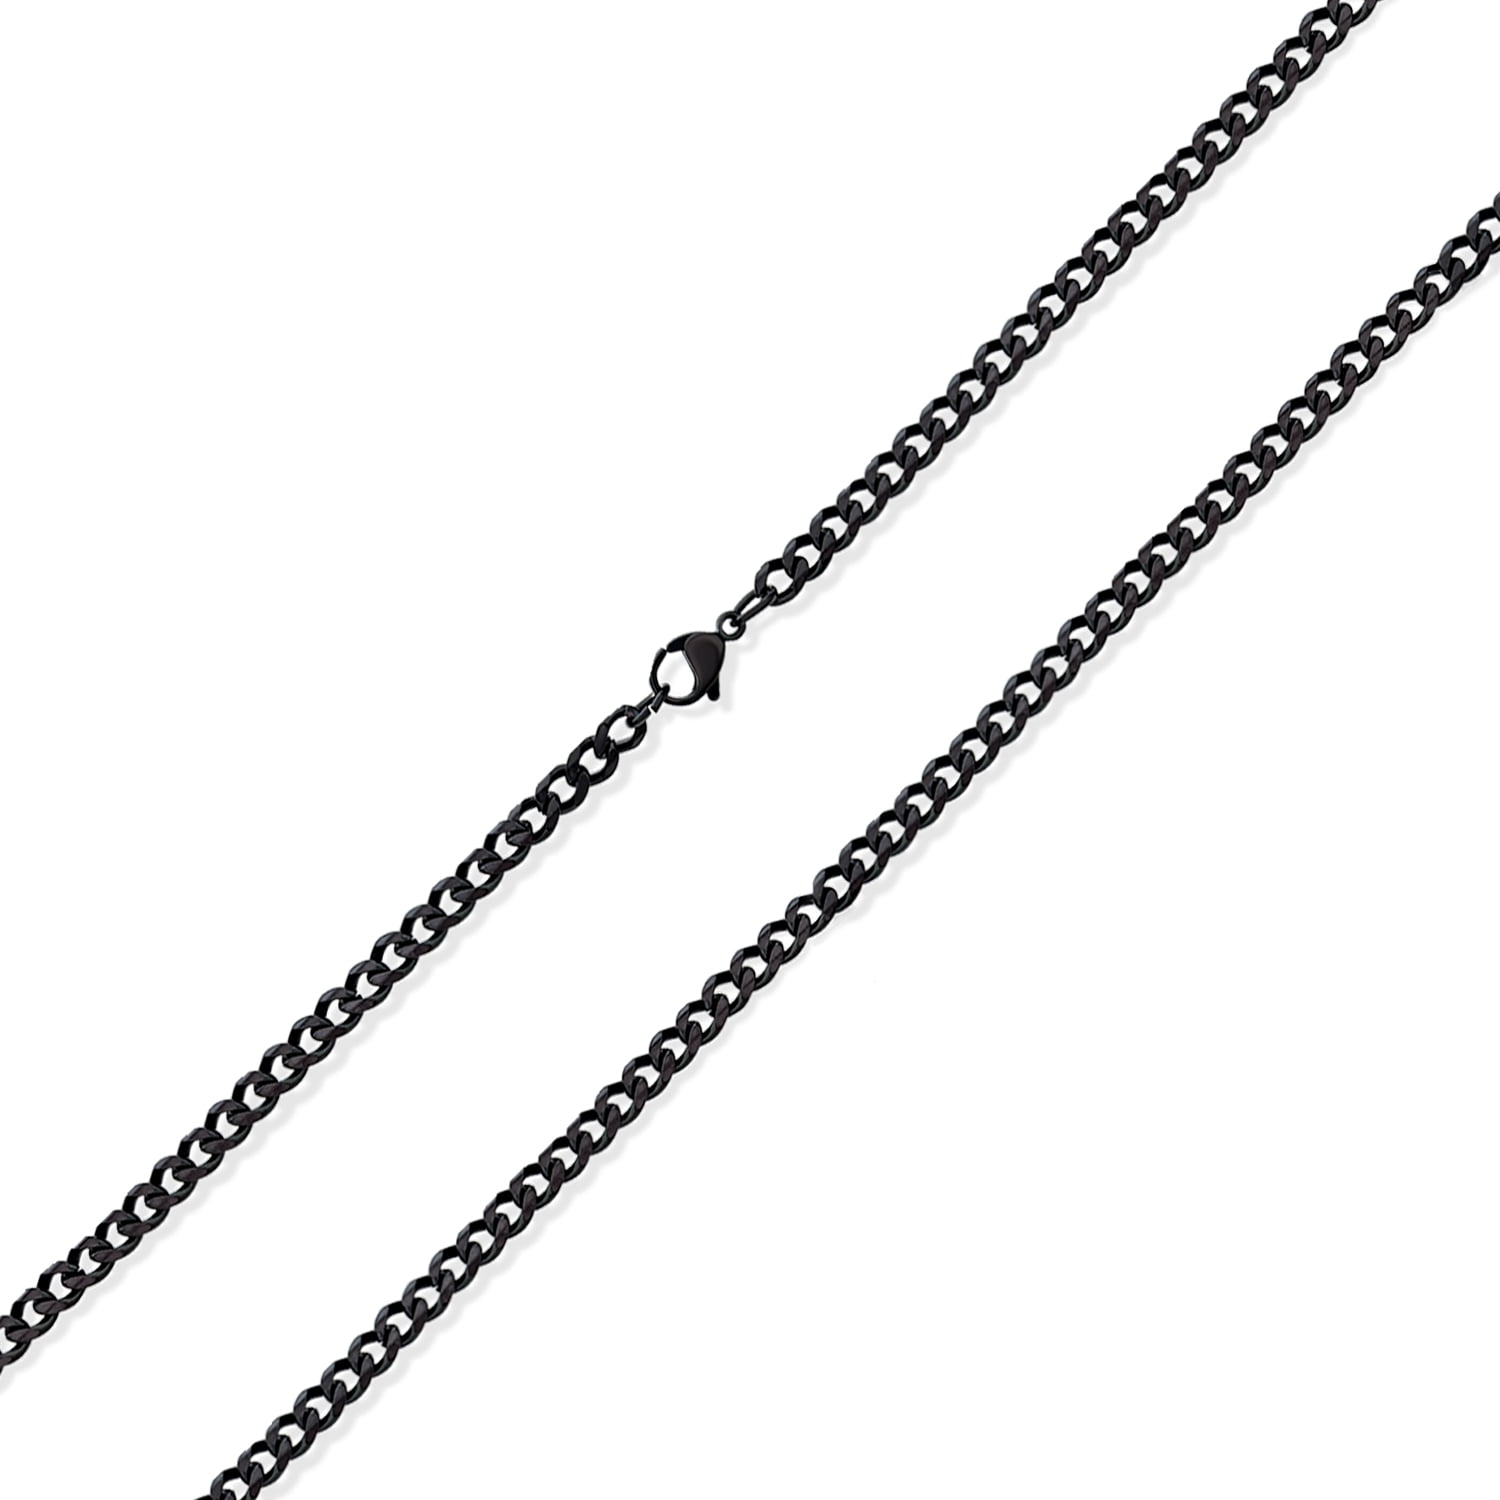 3mm 4mm 5mm Italy 925 Silver 14k White Gold Stylish Bead Beaded Link Chain 